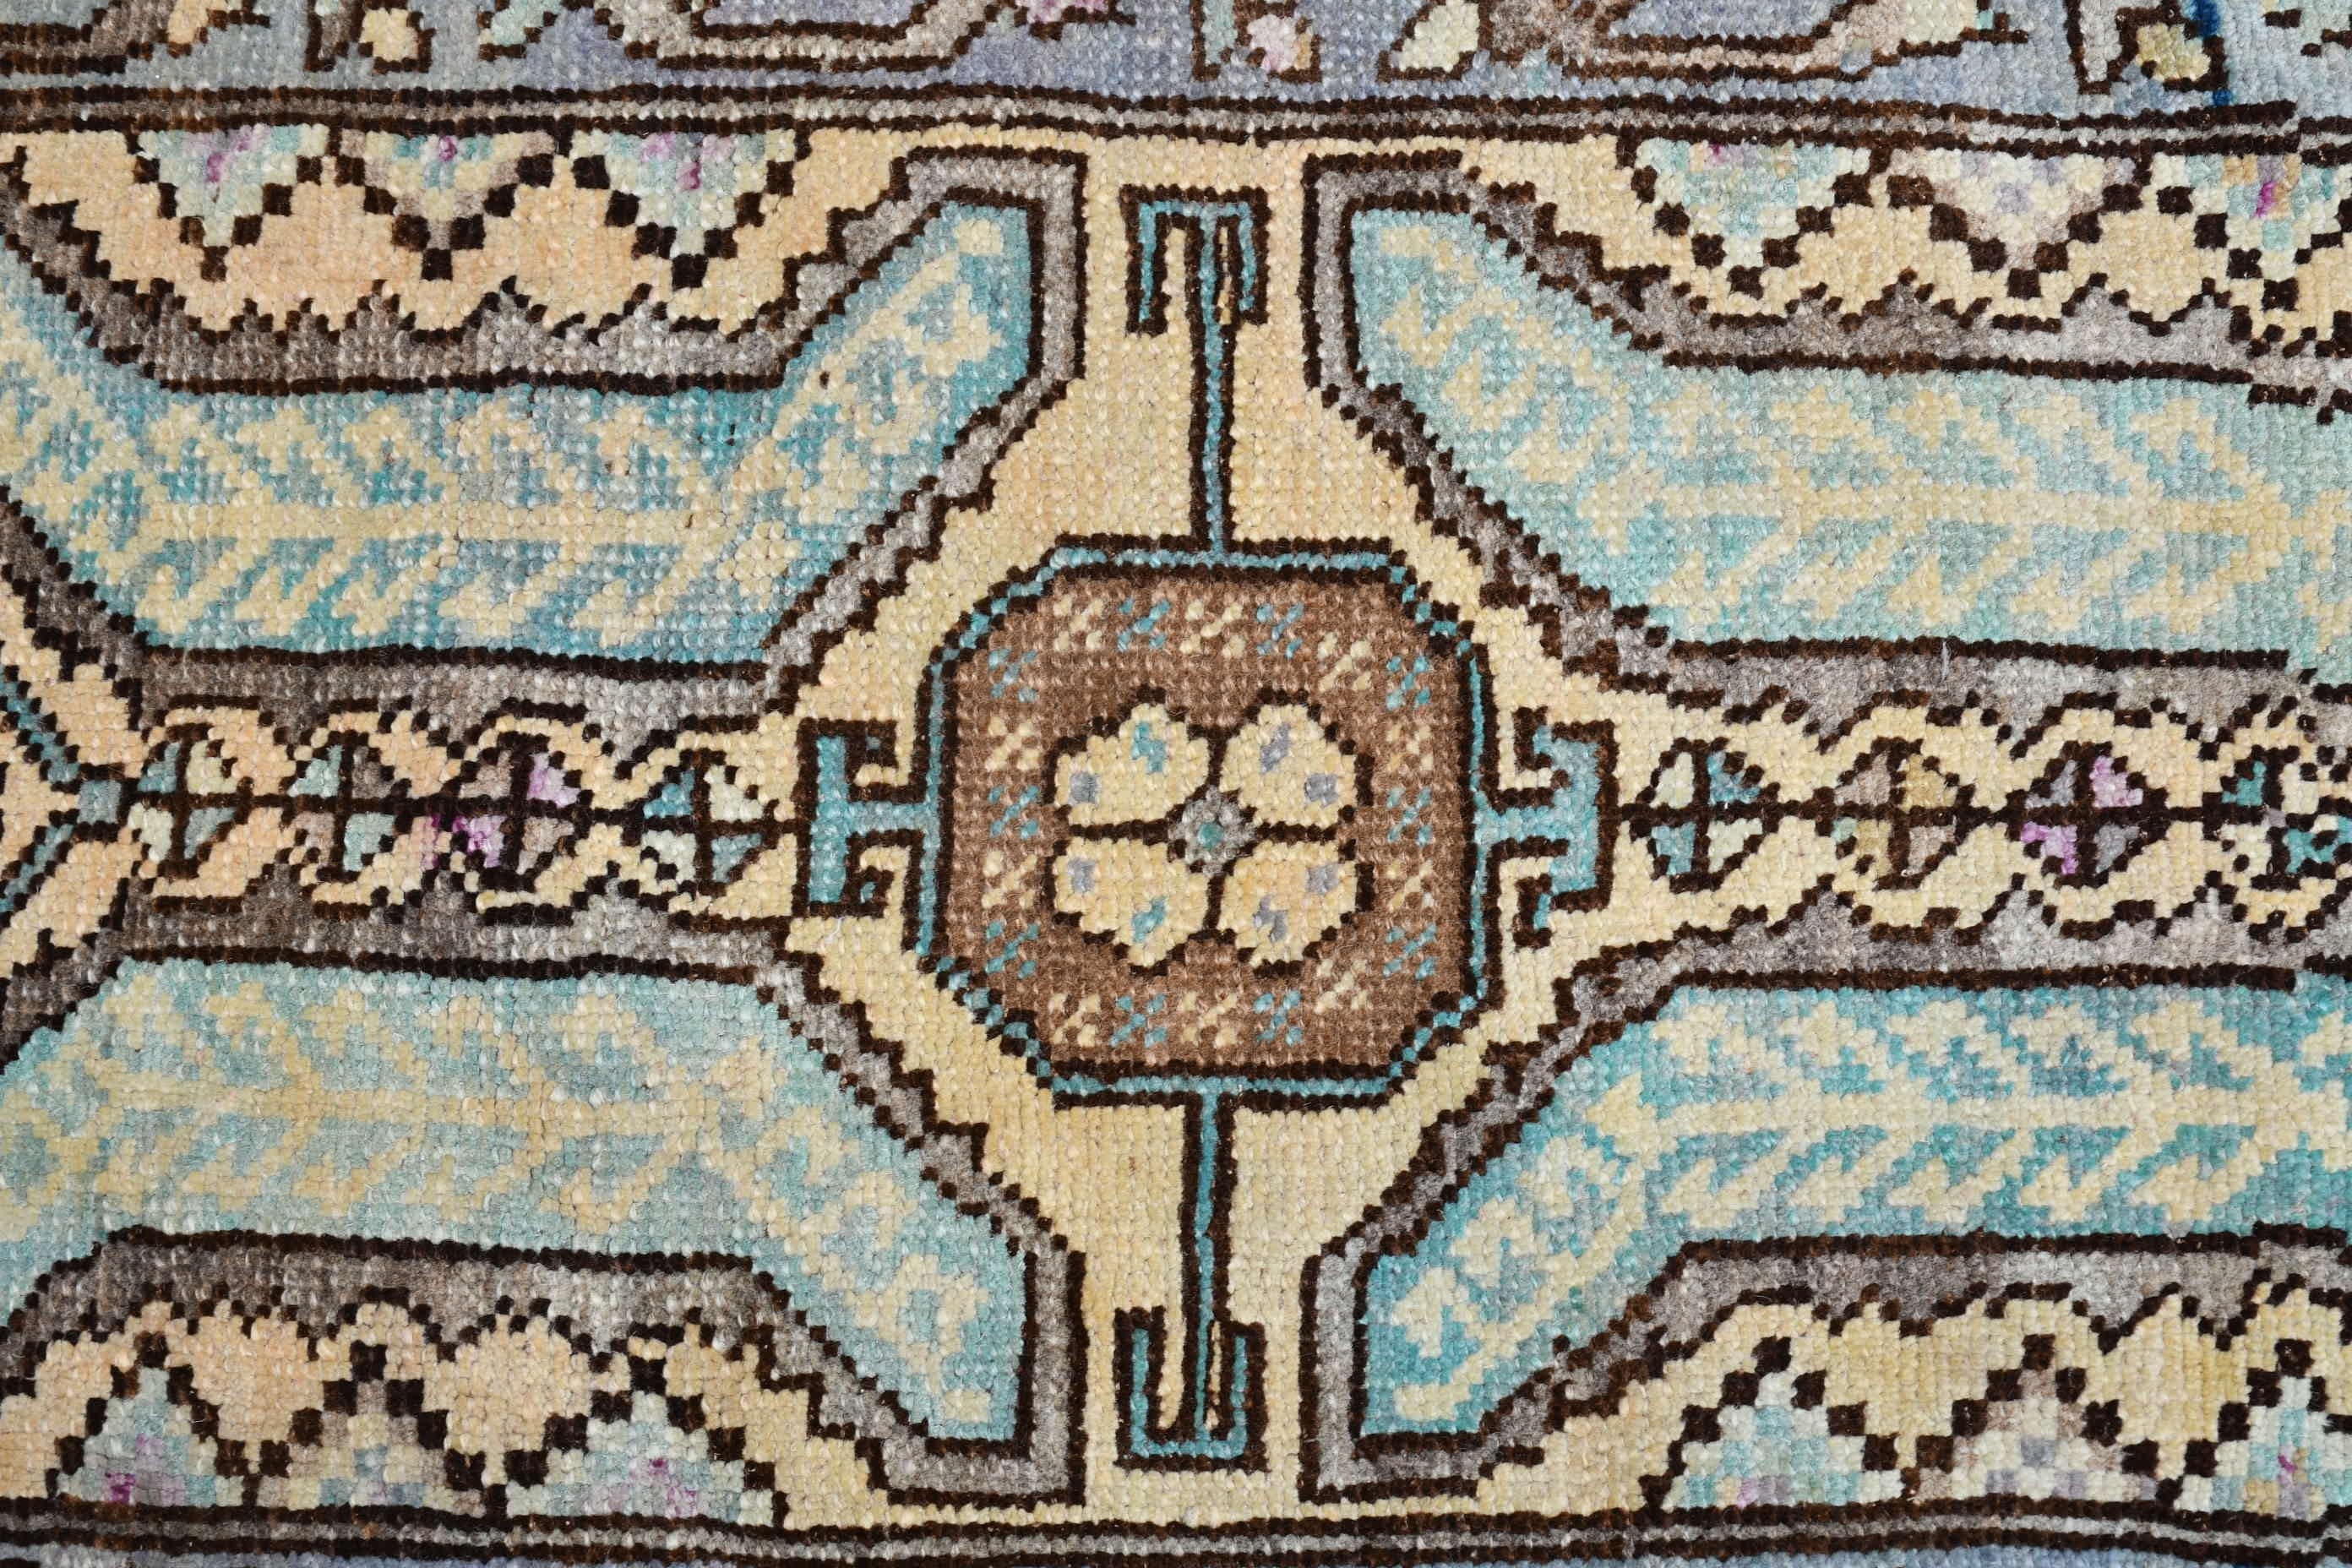 Oriental Rug, Pastel Rugs, Rugs for Kitchen, Bathroom Rug, Bedroom Rug, Blue Oriental Rug, Vintage Rugs, Turkish Rugs, 1.6x2.9 ft Small Rug